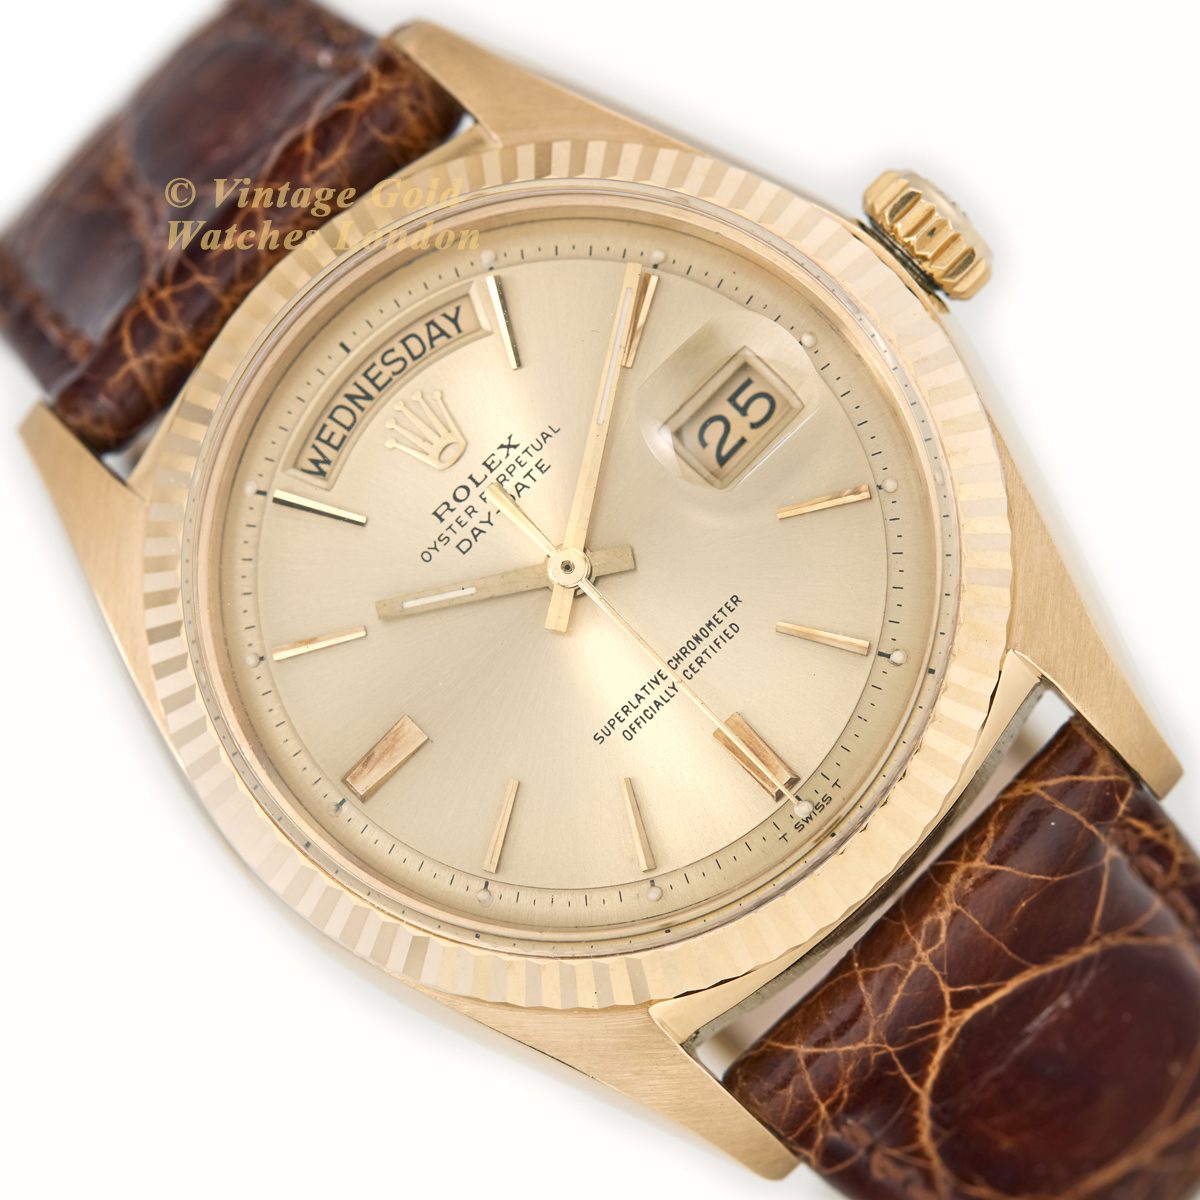 Rolex Oyster Perpetual Day Date Superlative Chronometer Officially